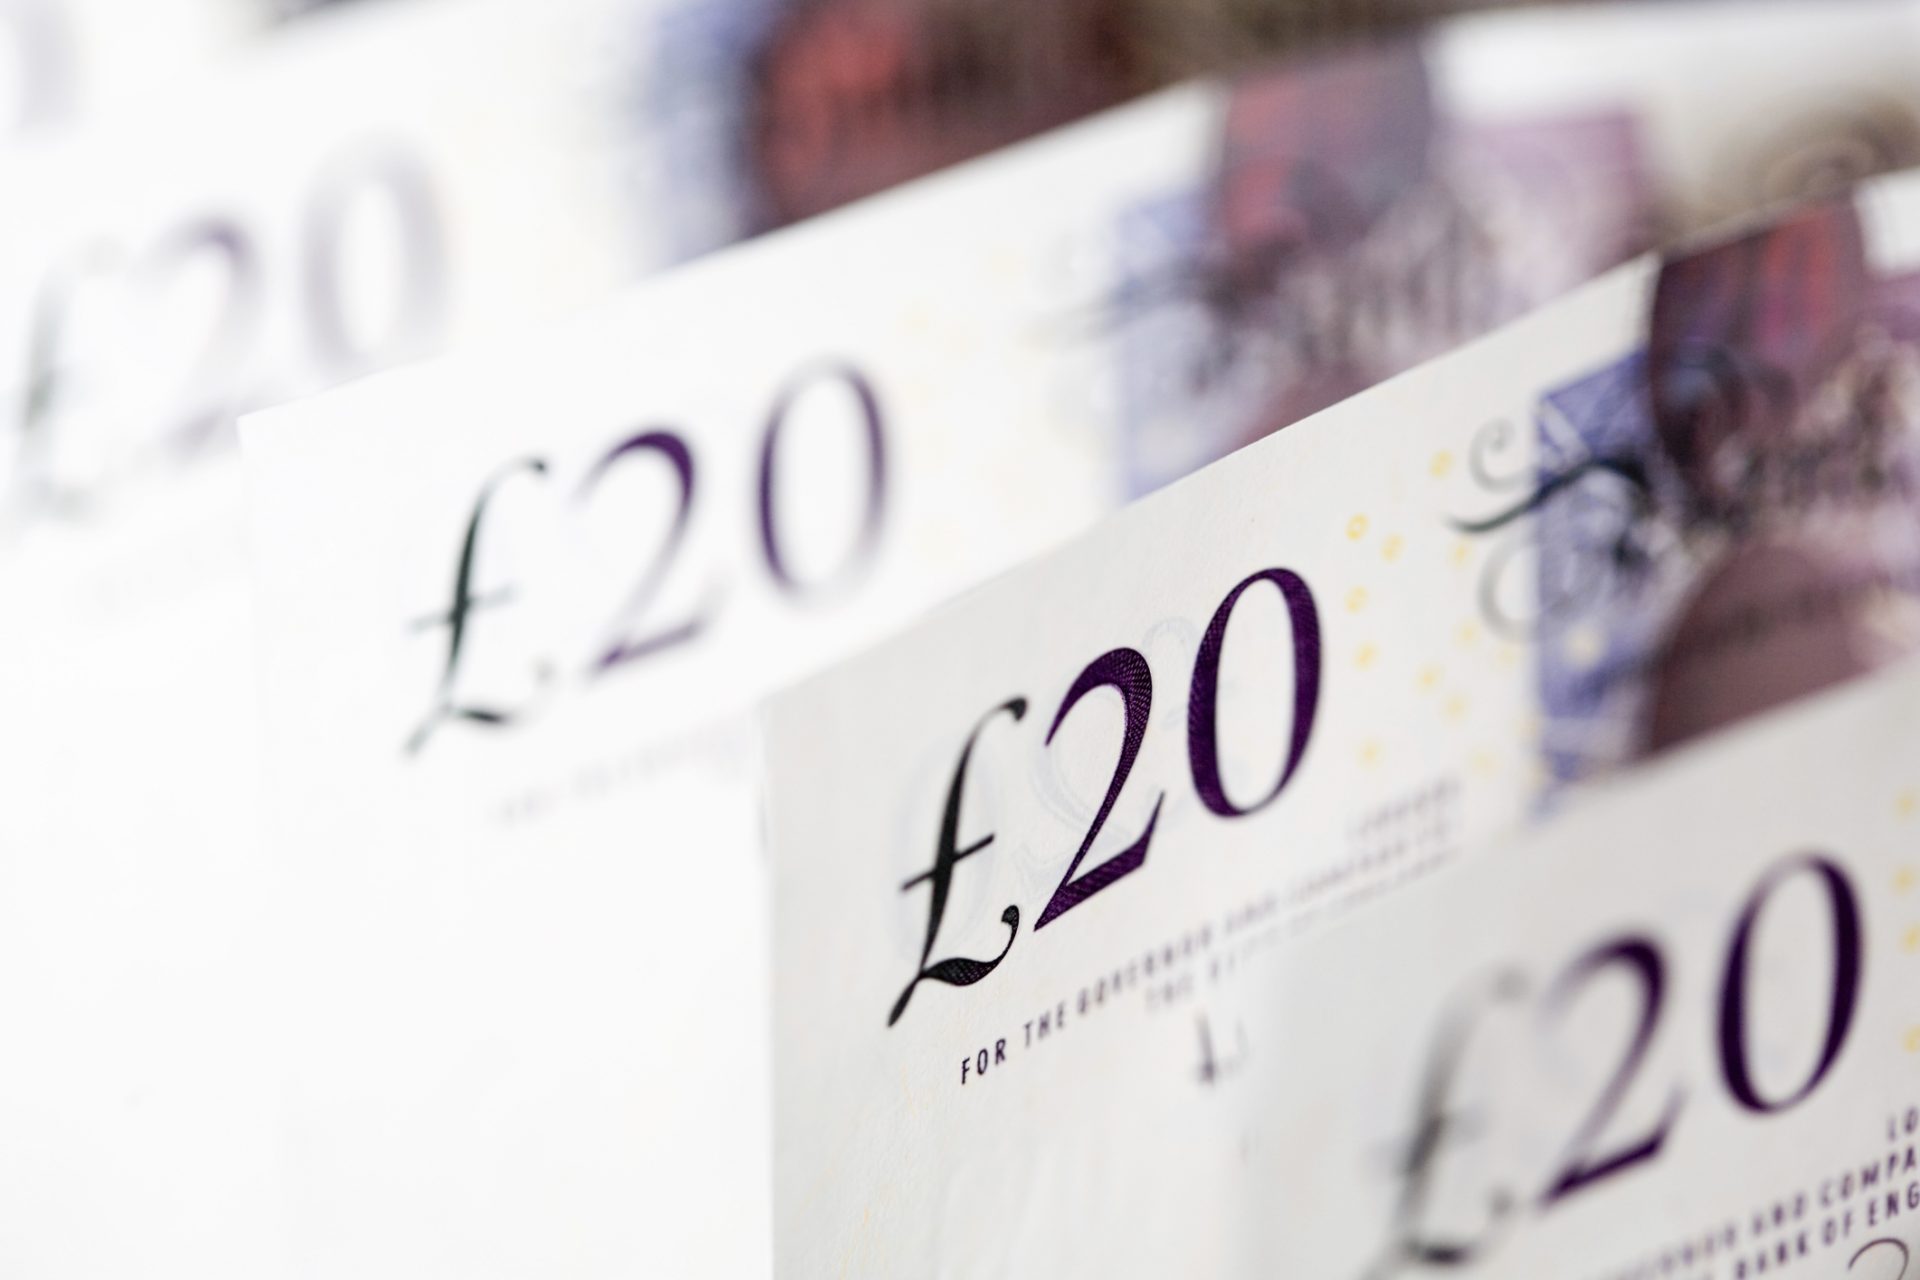 UK Economy influences for binary options in Q2 and Q3 2015